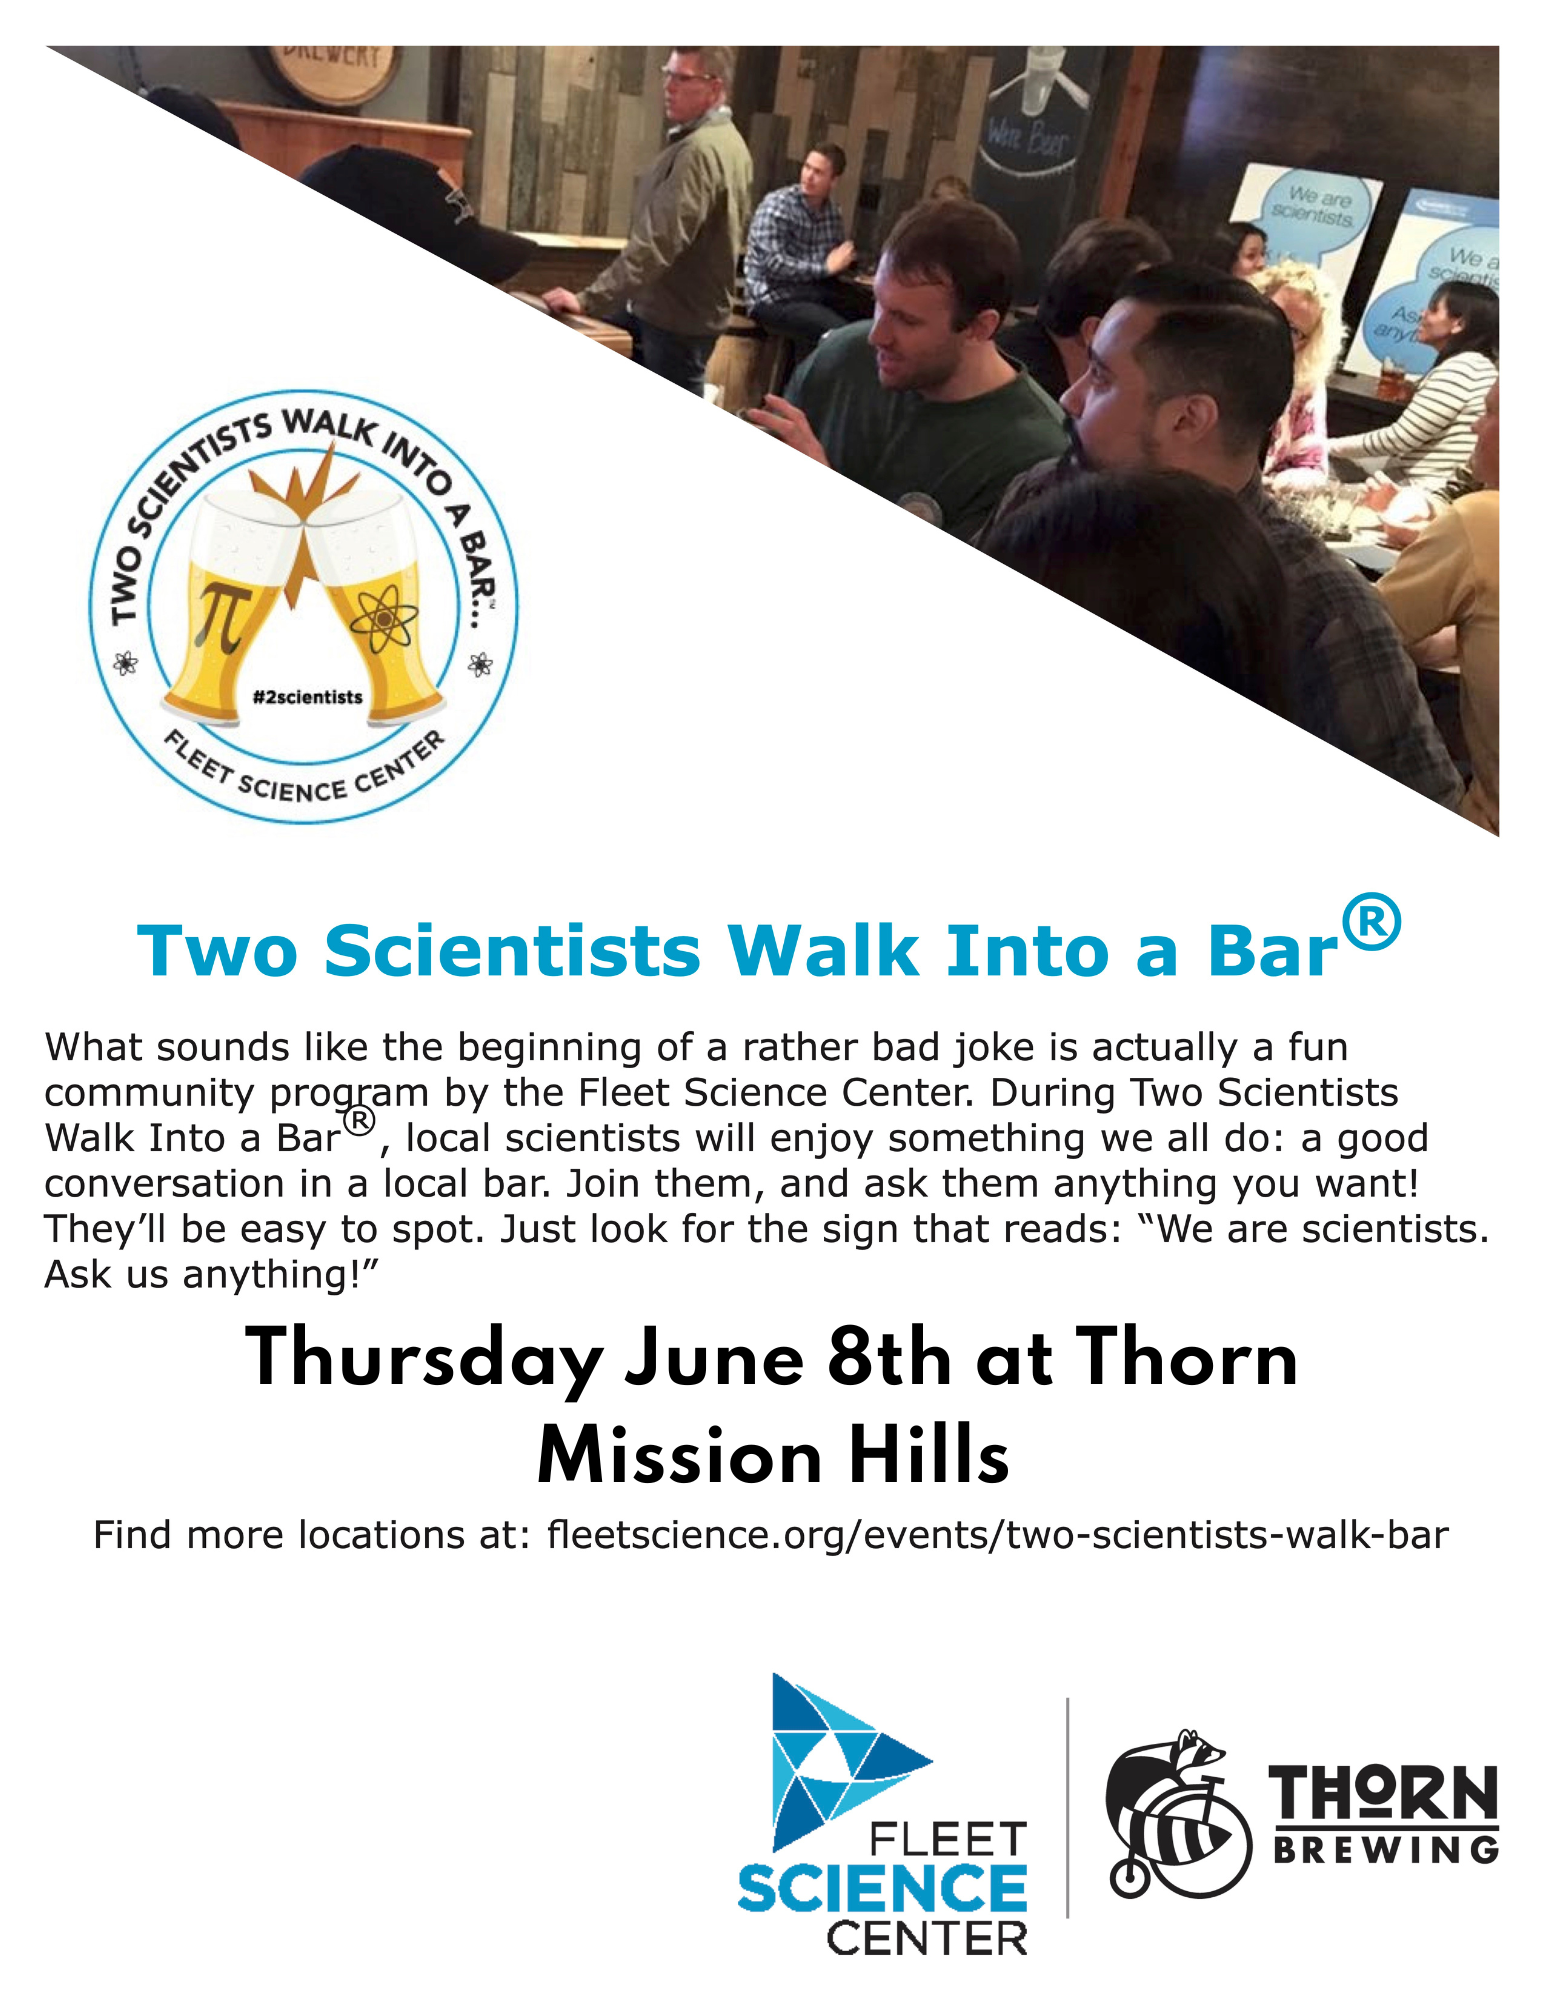 Flyer promoting Two Scientists Walk Into A Bar an event at thorn brewing with words and a logo for fleet science center